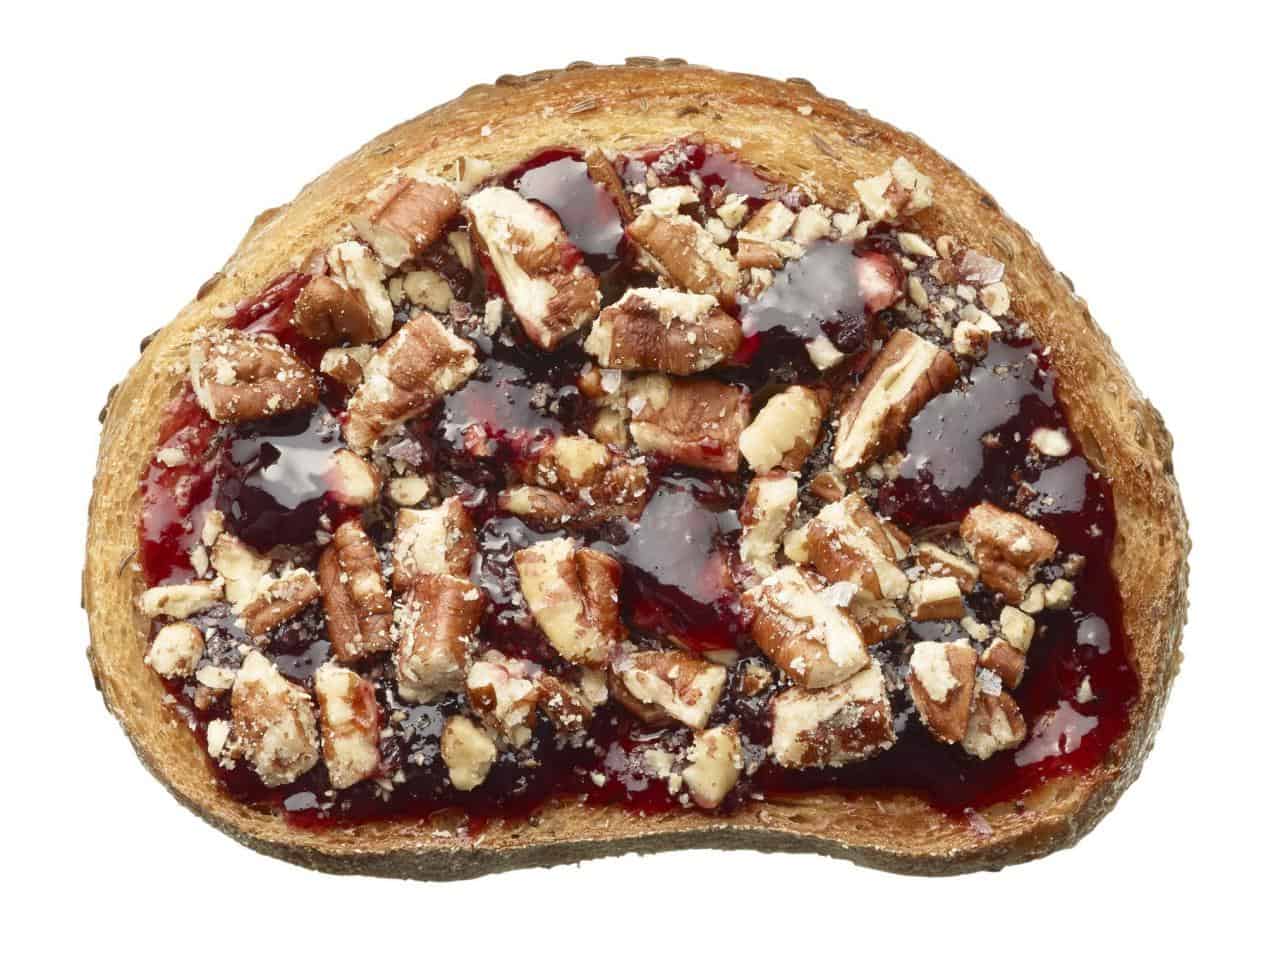 Chopped pecan and grape jelly toast